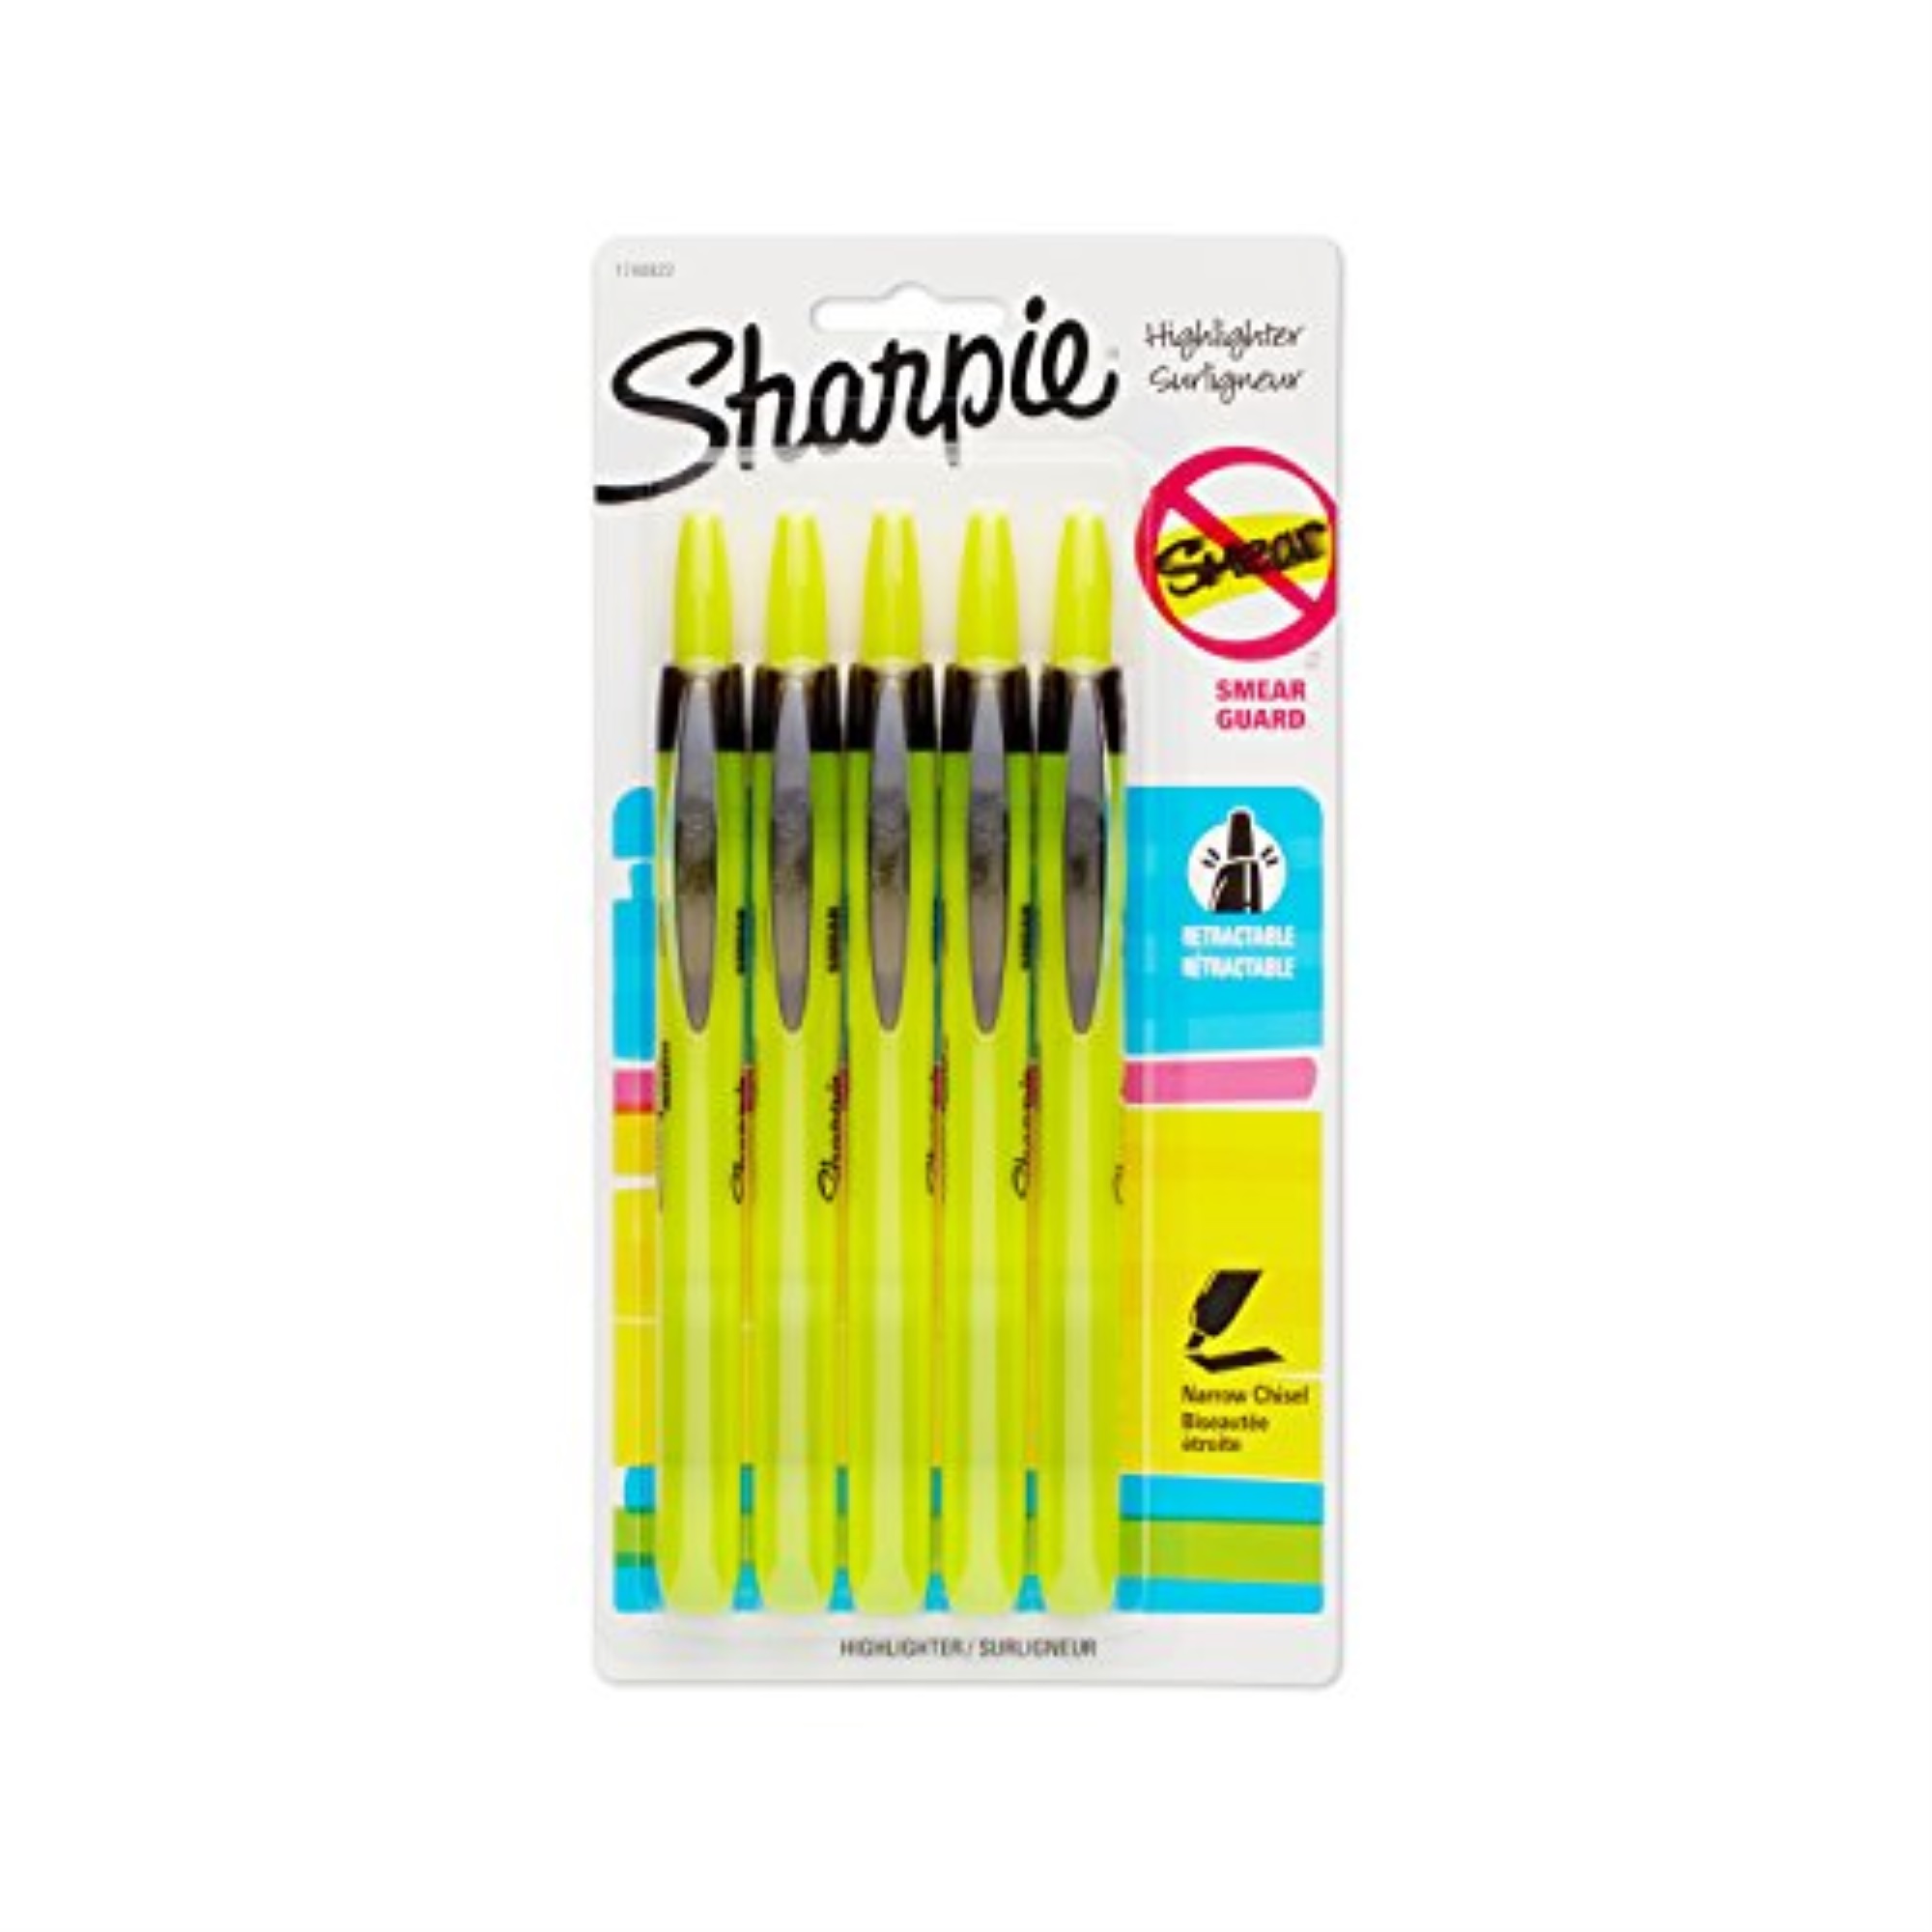 Sharpie 1740822 Accent Retractable Highlighter, Chisel Tip, Fluorescent Yellow, 5-Count